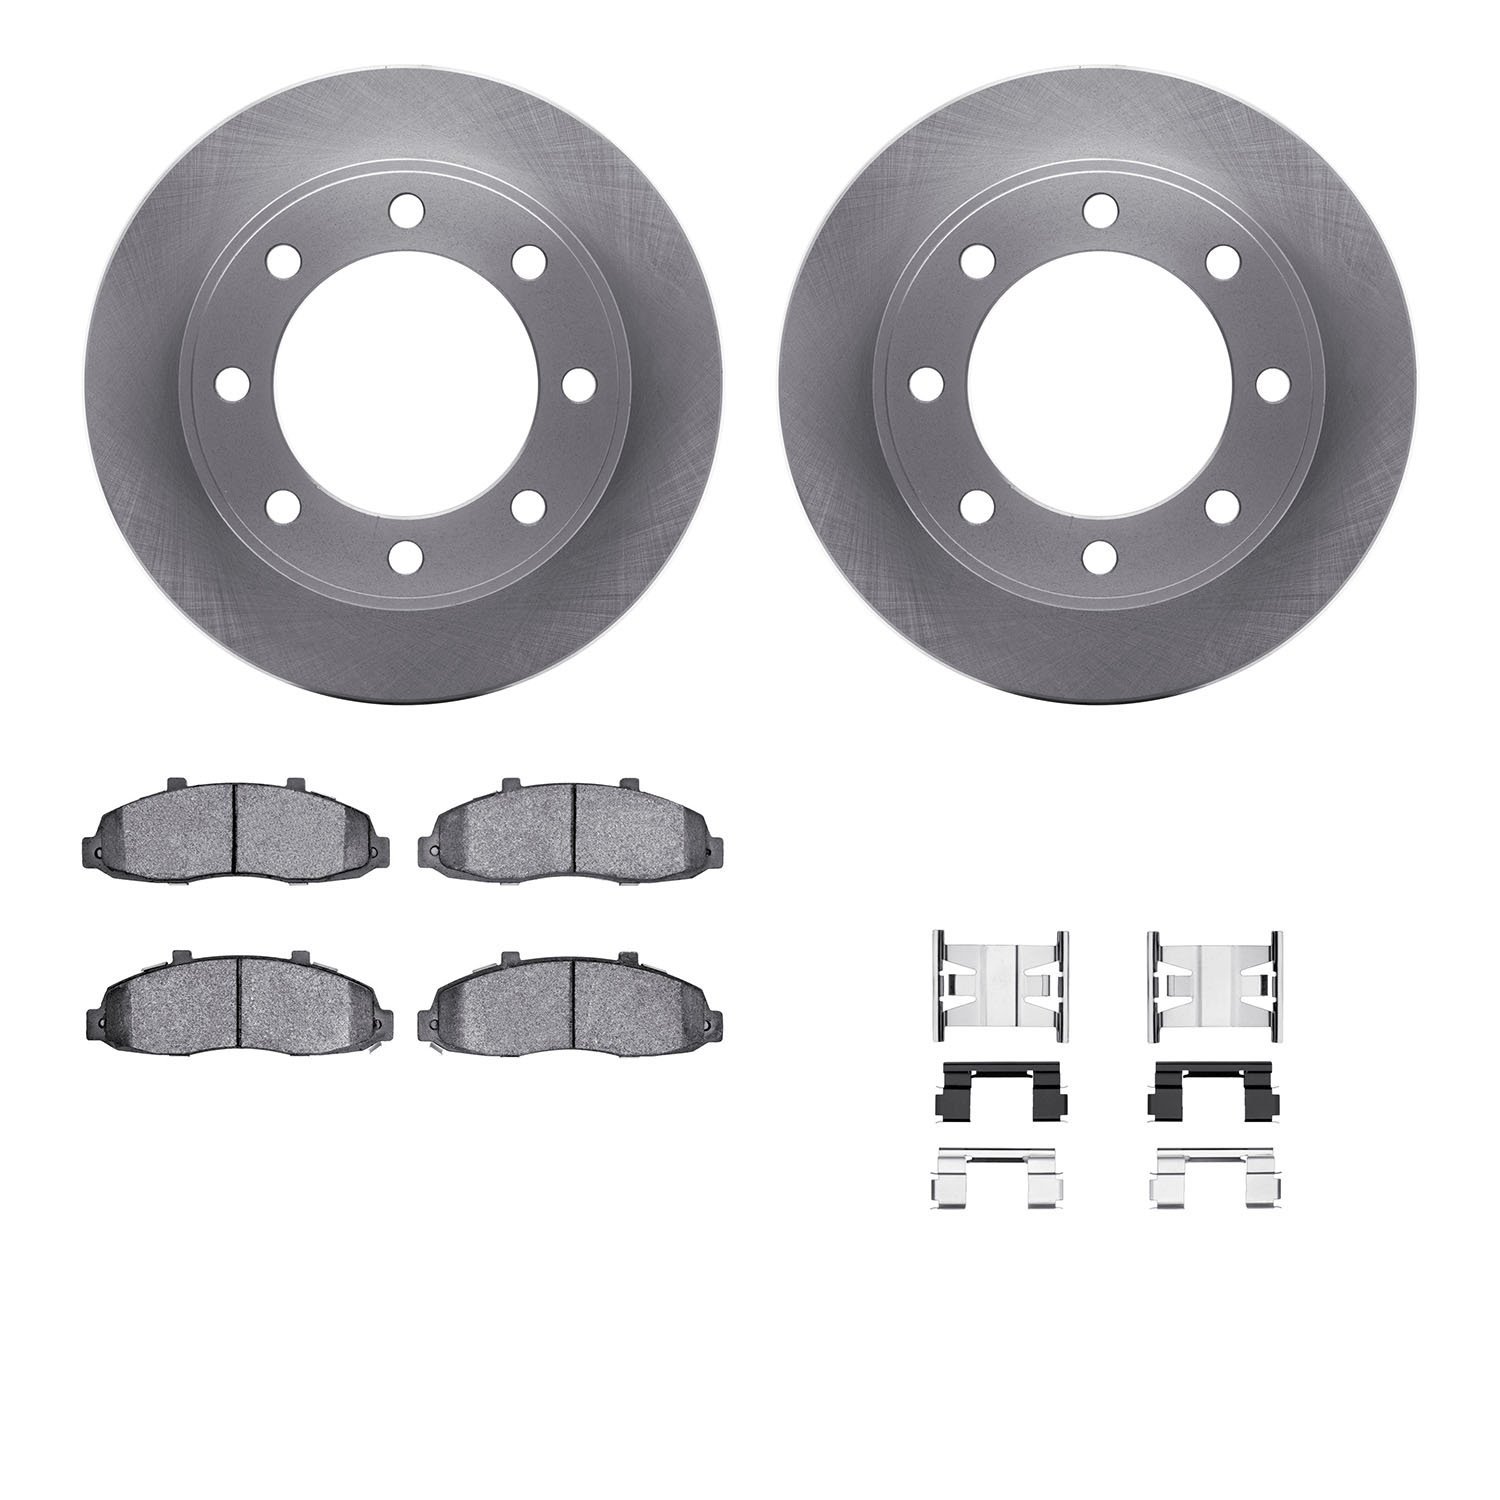 6412-54101 Brake Rotors with Ultimate-Duty Brake Pads Kit & Hardware, 1997-2004 Ford/Lincoln/Mercury/Mazda, Position: Front